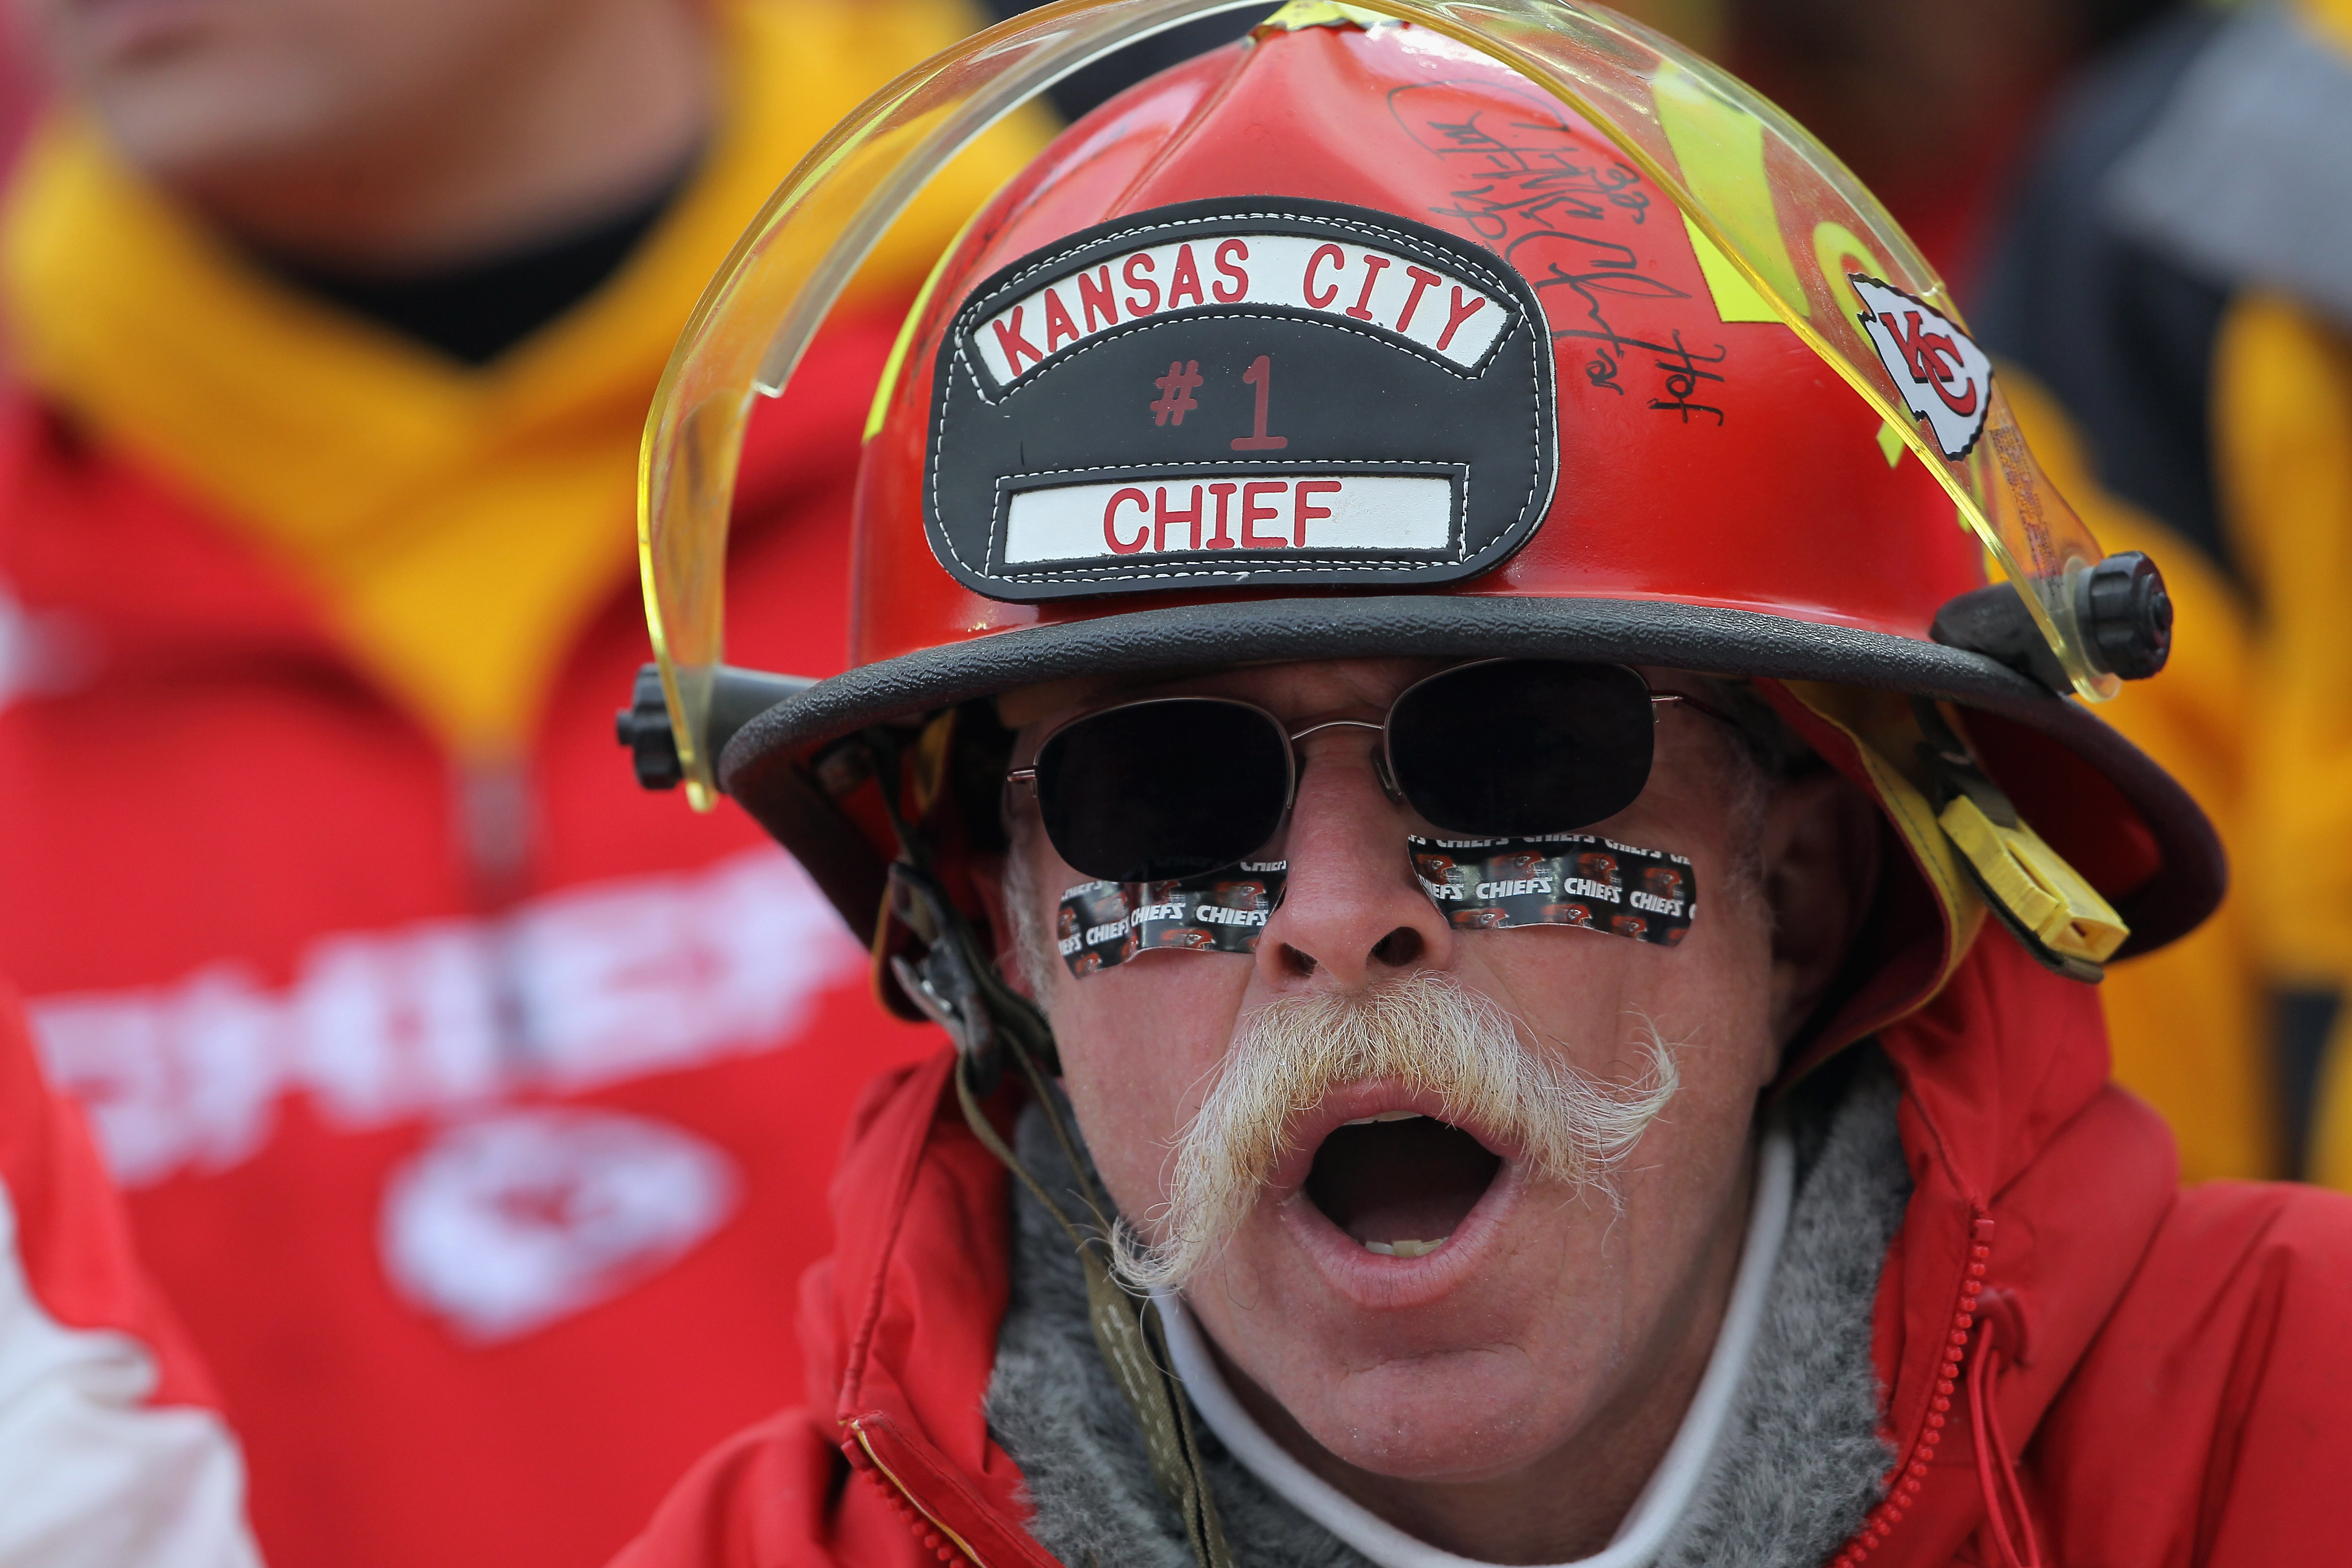 KANSAS CITY, MO - JANUARY 09:  A fan of the Kansas City Chiefs supports his team against the Baltimore Ravens as the Ravens defeated the Chiefs 30-7 in the 2011 AFC wild card playoff game at Arrowhead Stadium on January 9, 2011 in Kansas City, Missouri.  